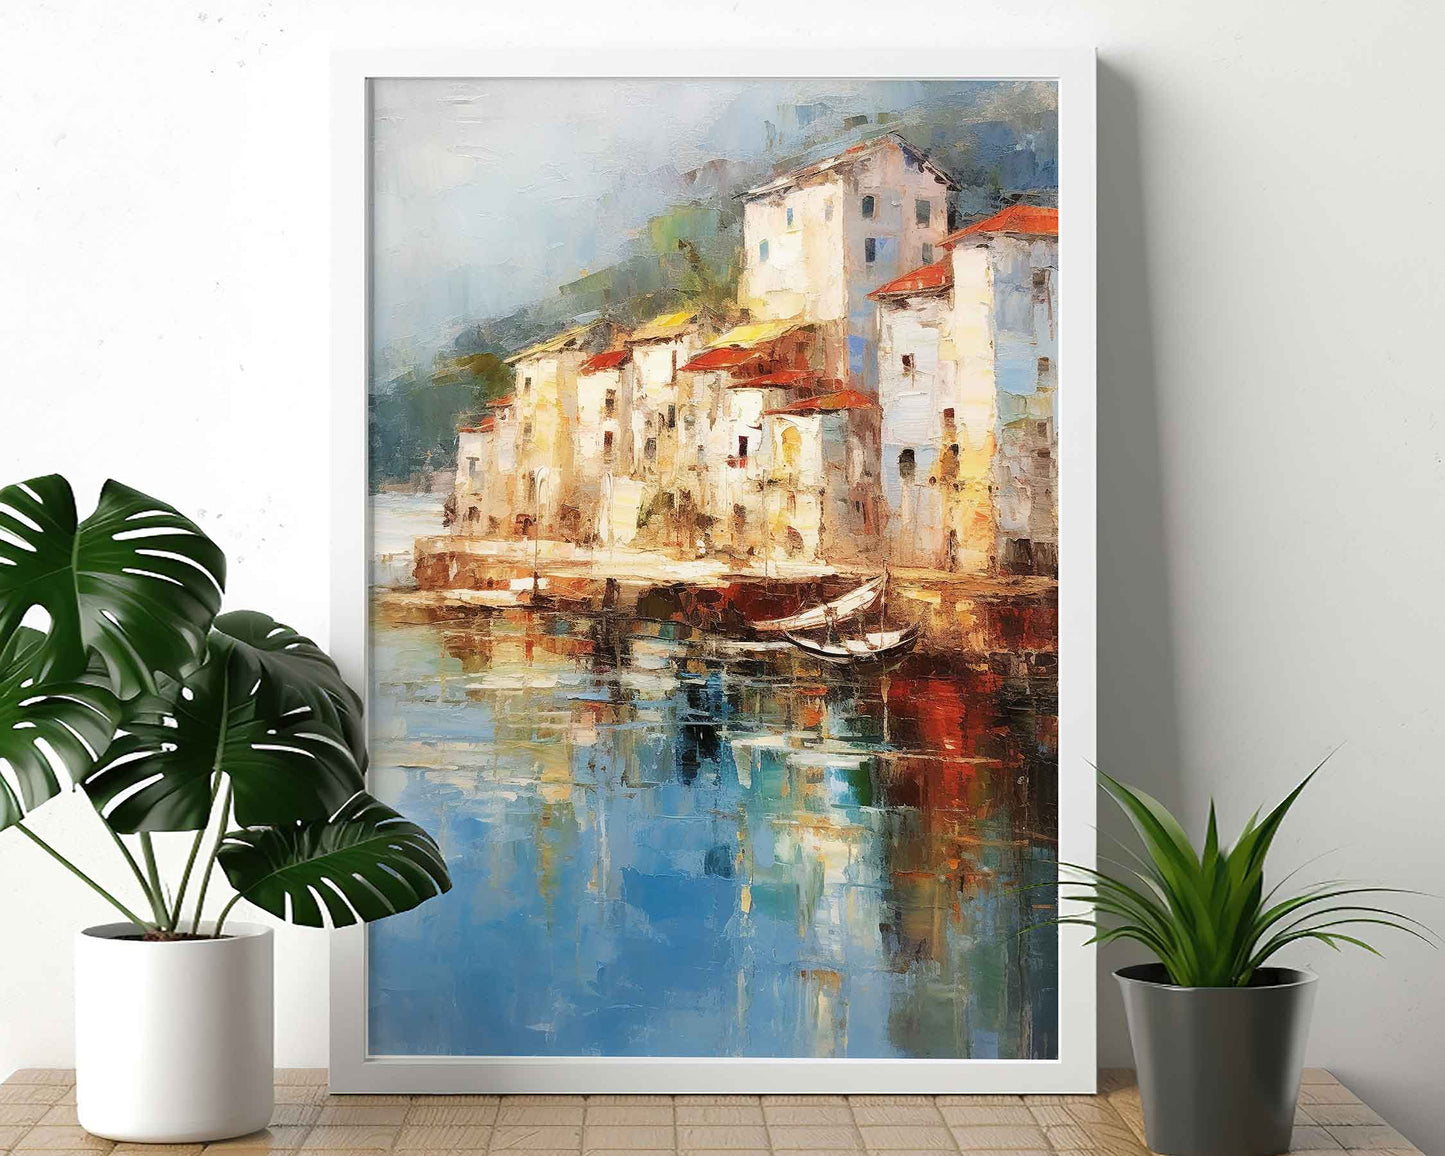 Framed Image of Italian Scenic Travel Landscapes & Lifestyle Wall Art Prints of Italy